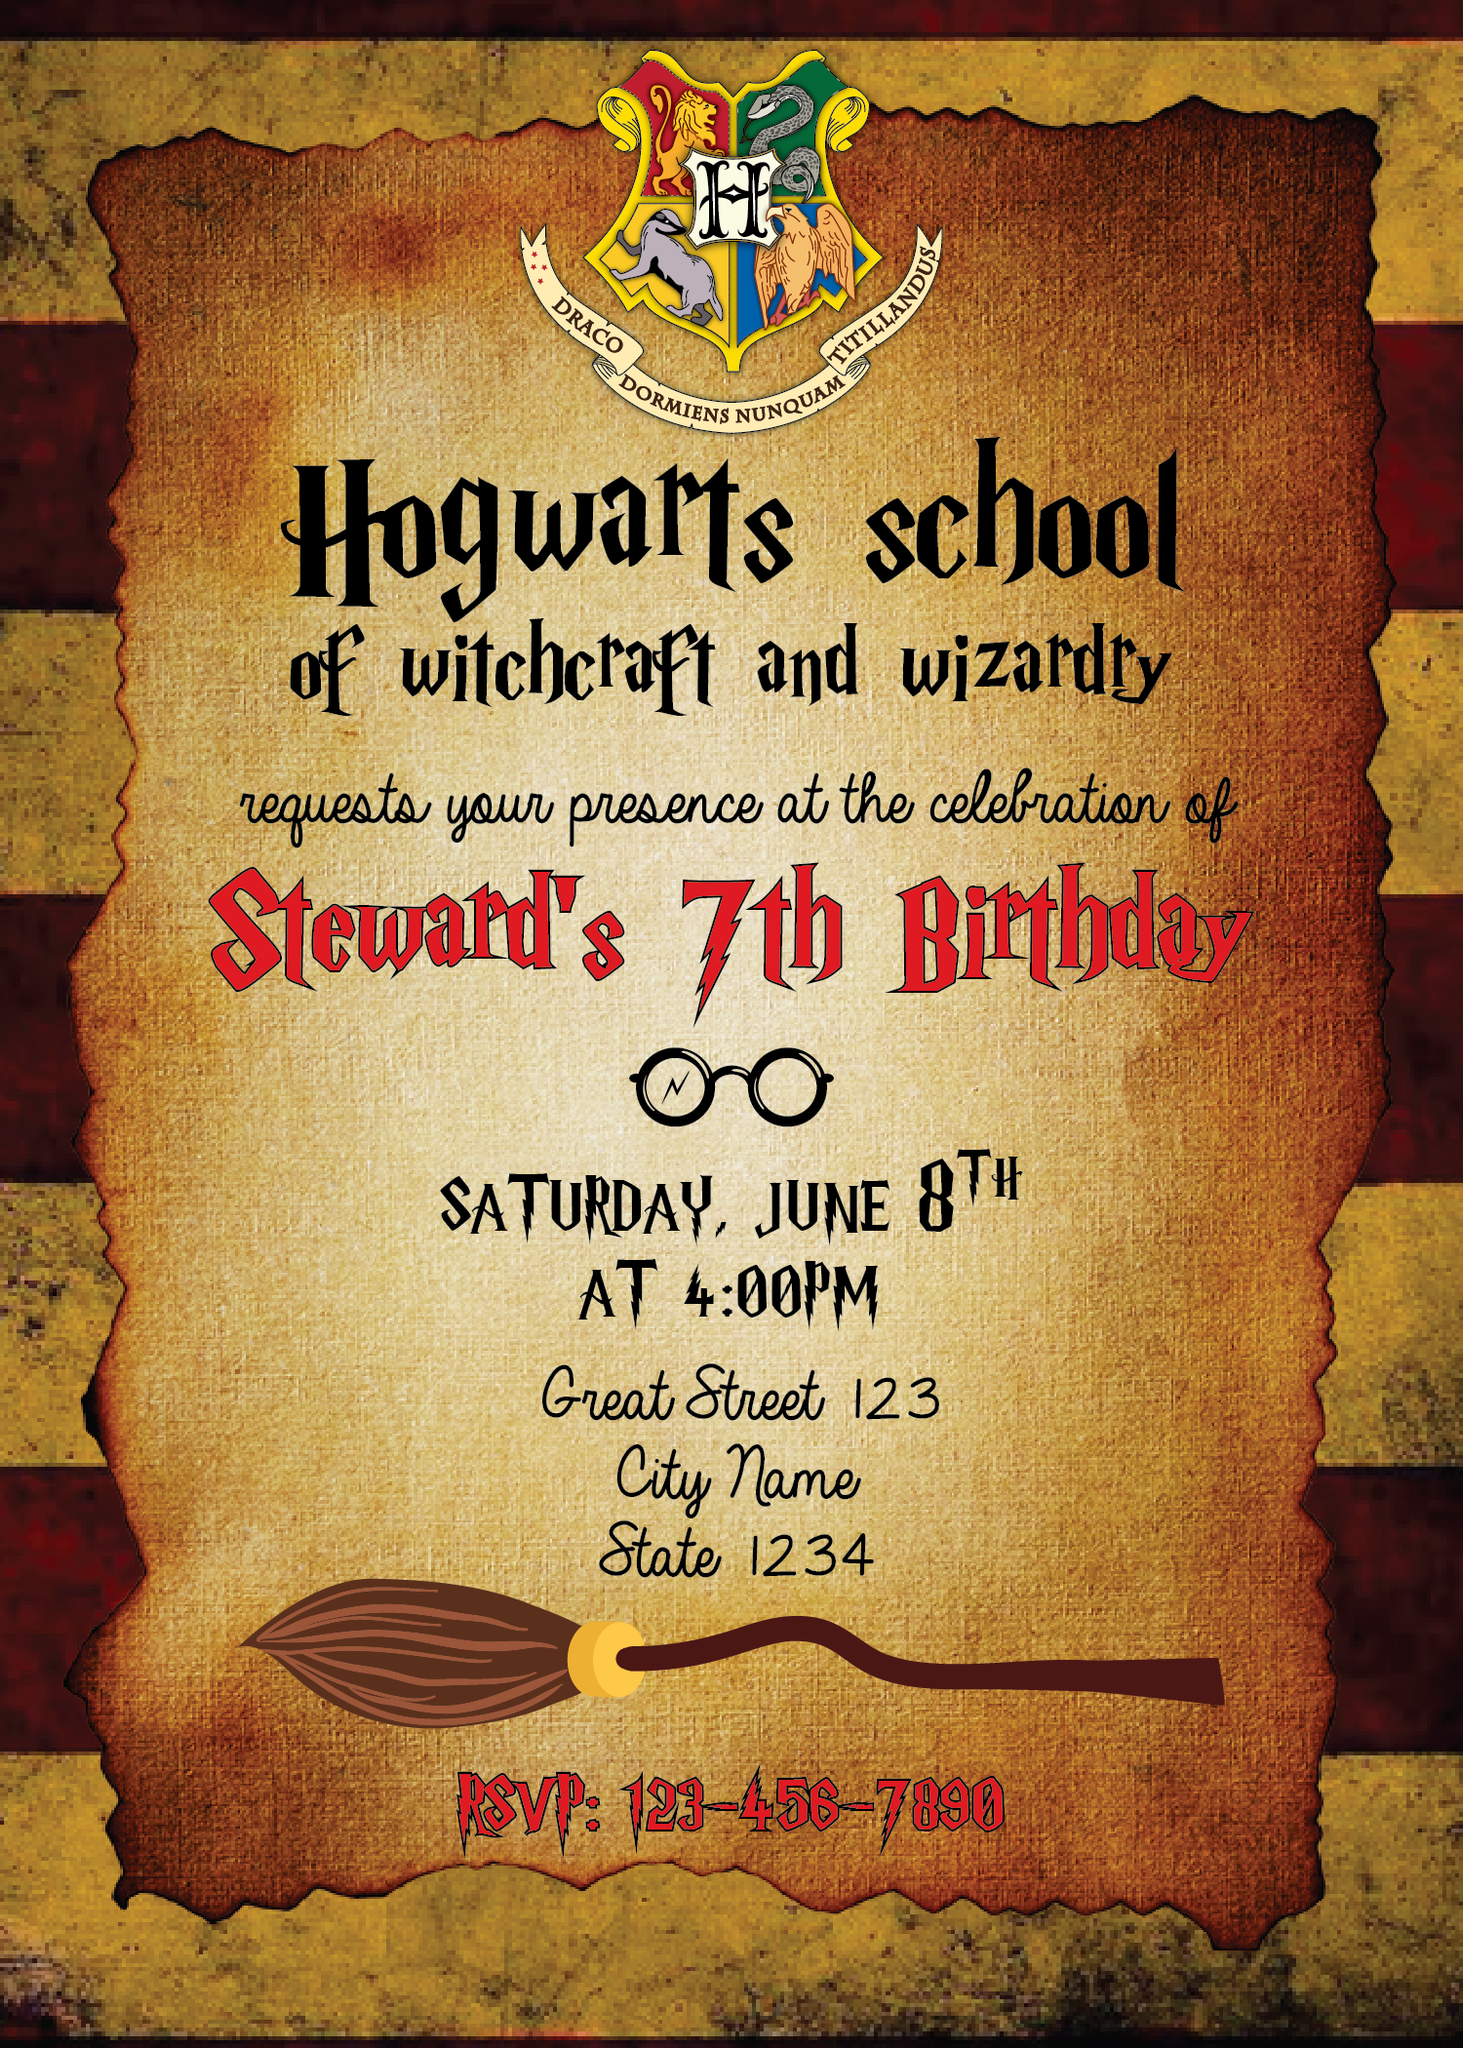 DIY Harry Potter Invitations You Can Print From Home  Harry potter  invitations, Harry potter birthday invitations, Harry potter party  invitations